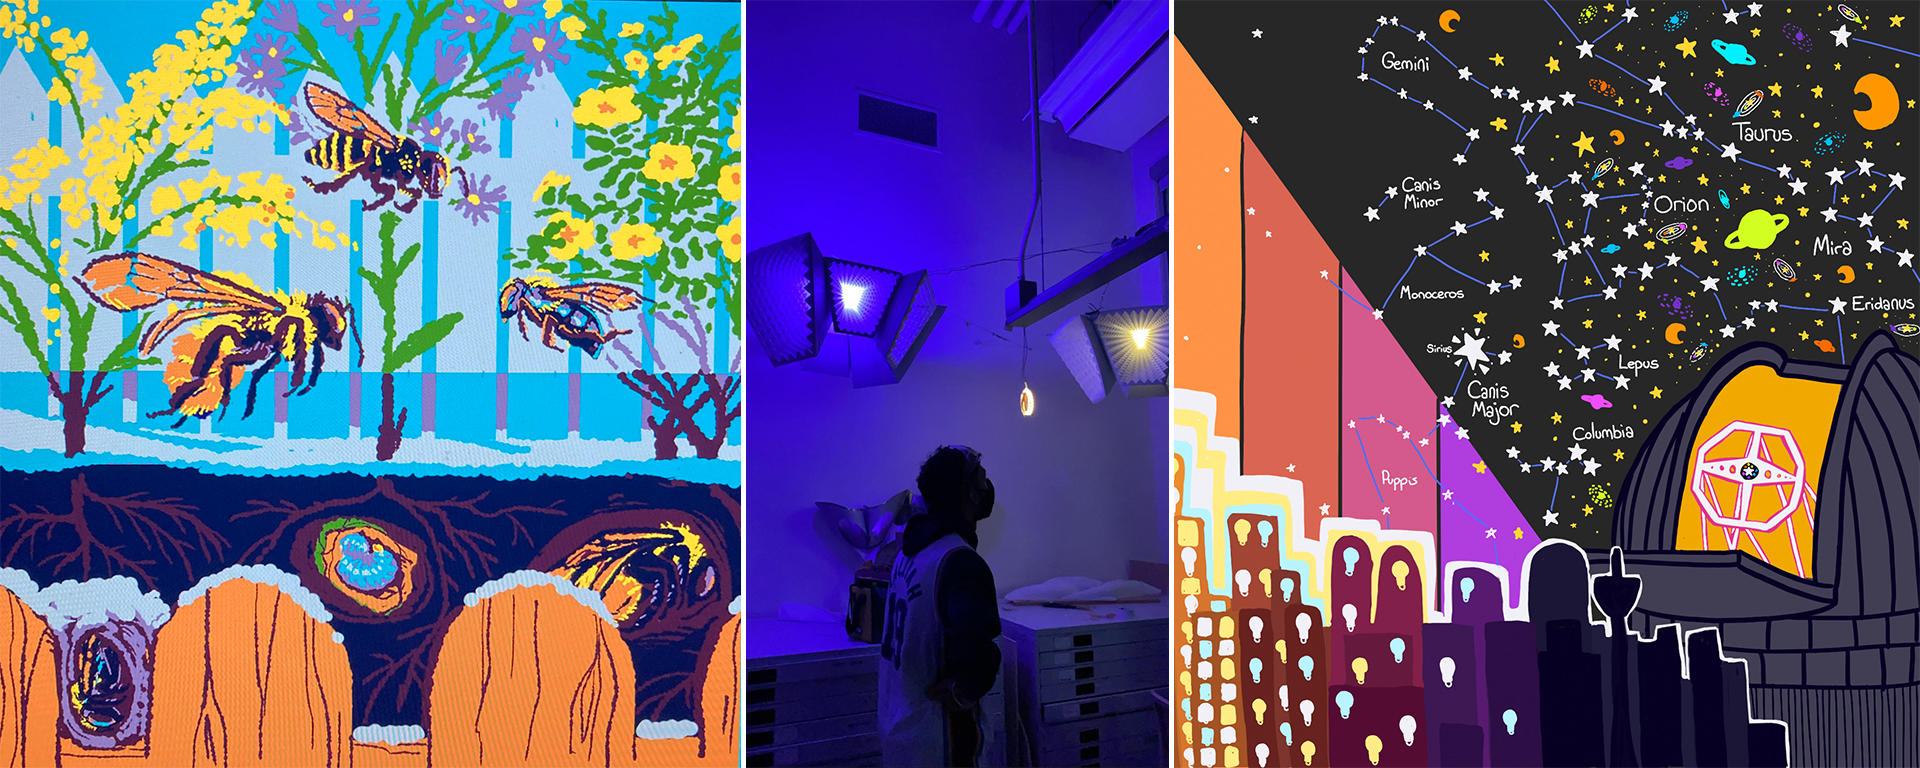 A compilation of three artworks featured in the story. One image is a painting of bees in a forest, one if of a man looking up at an illuminated sculpture, and one depicts a city skyline under a sky of constellations.